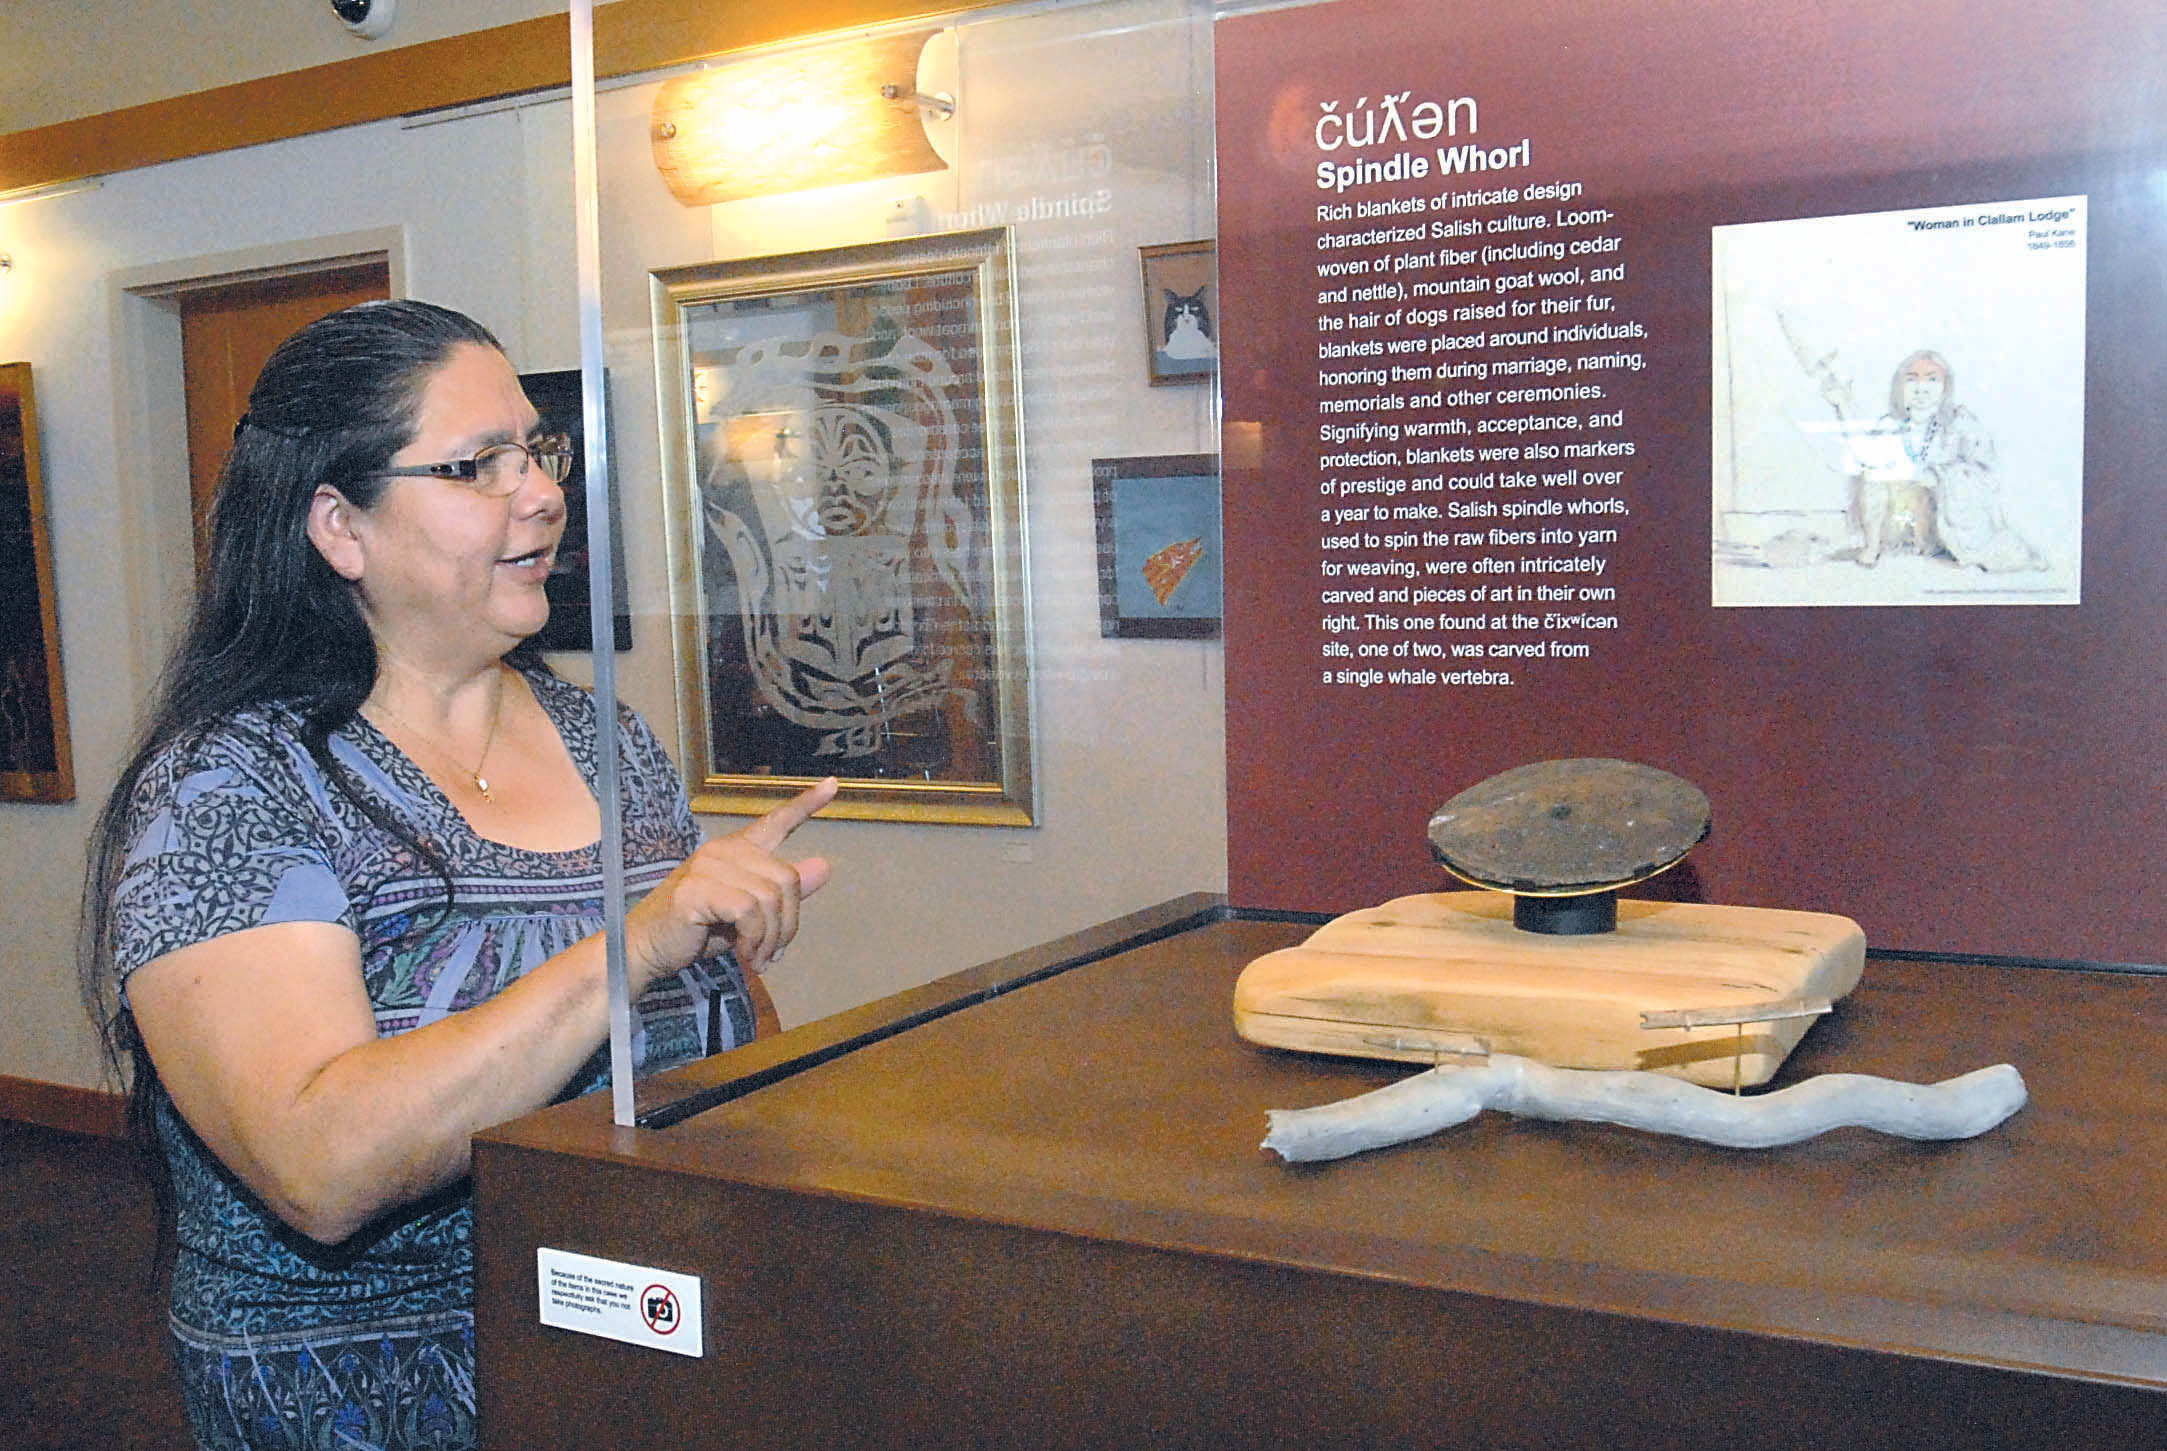 Lower Elwha Klallam Tribal Chairwoman Frances Charles looks over a display containing a spindle whorl for spinning fibers after the unveiling of tribal artifacts now on display at the Elwha Klallam Heritage Center in Port Angeles. Keith Thorpe/Peninsula Daily News